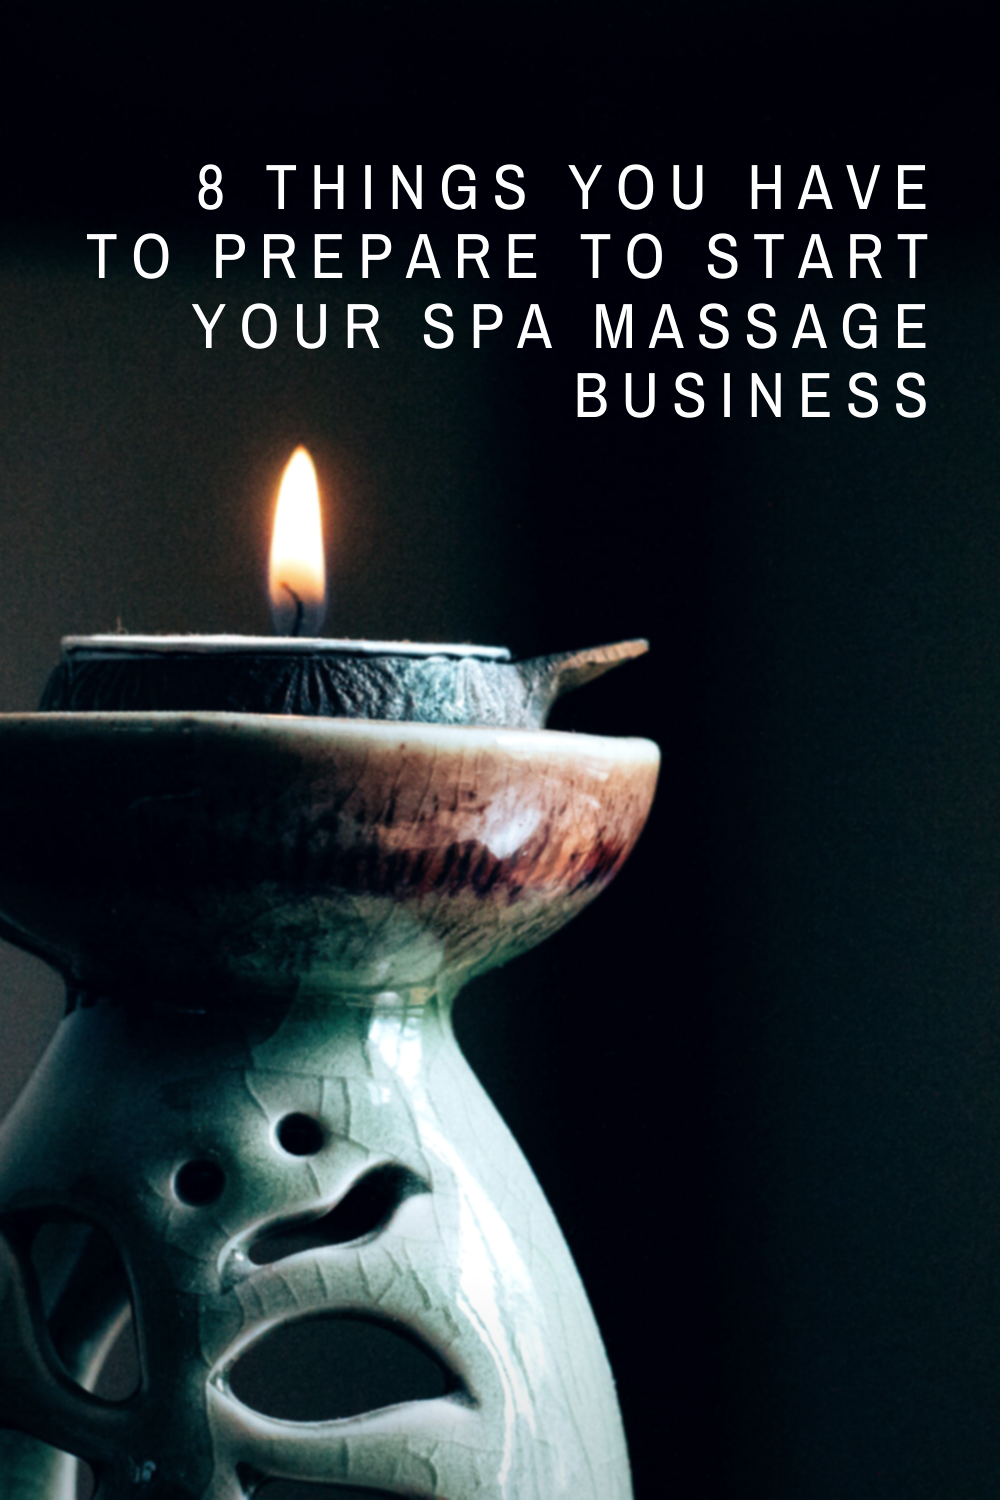 8 Things You Have To Prepare to Start Your Spa Massage Business as a Traveling Massage Therapist.png